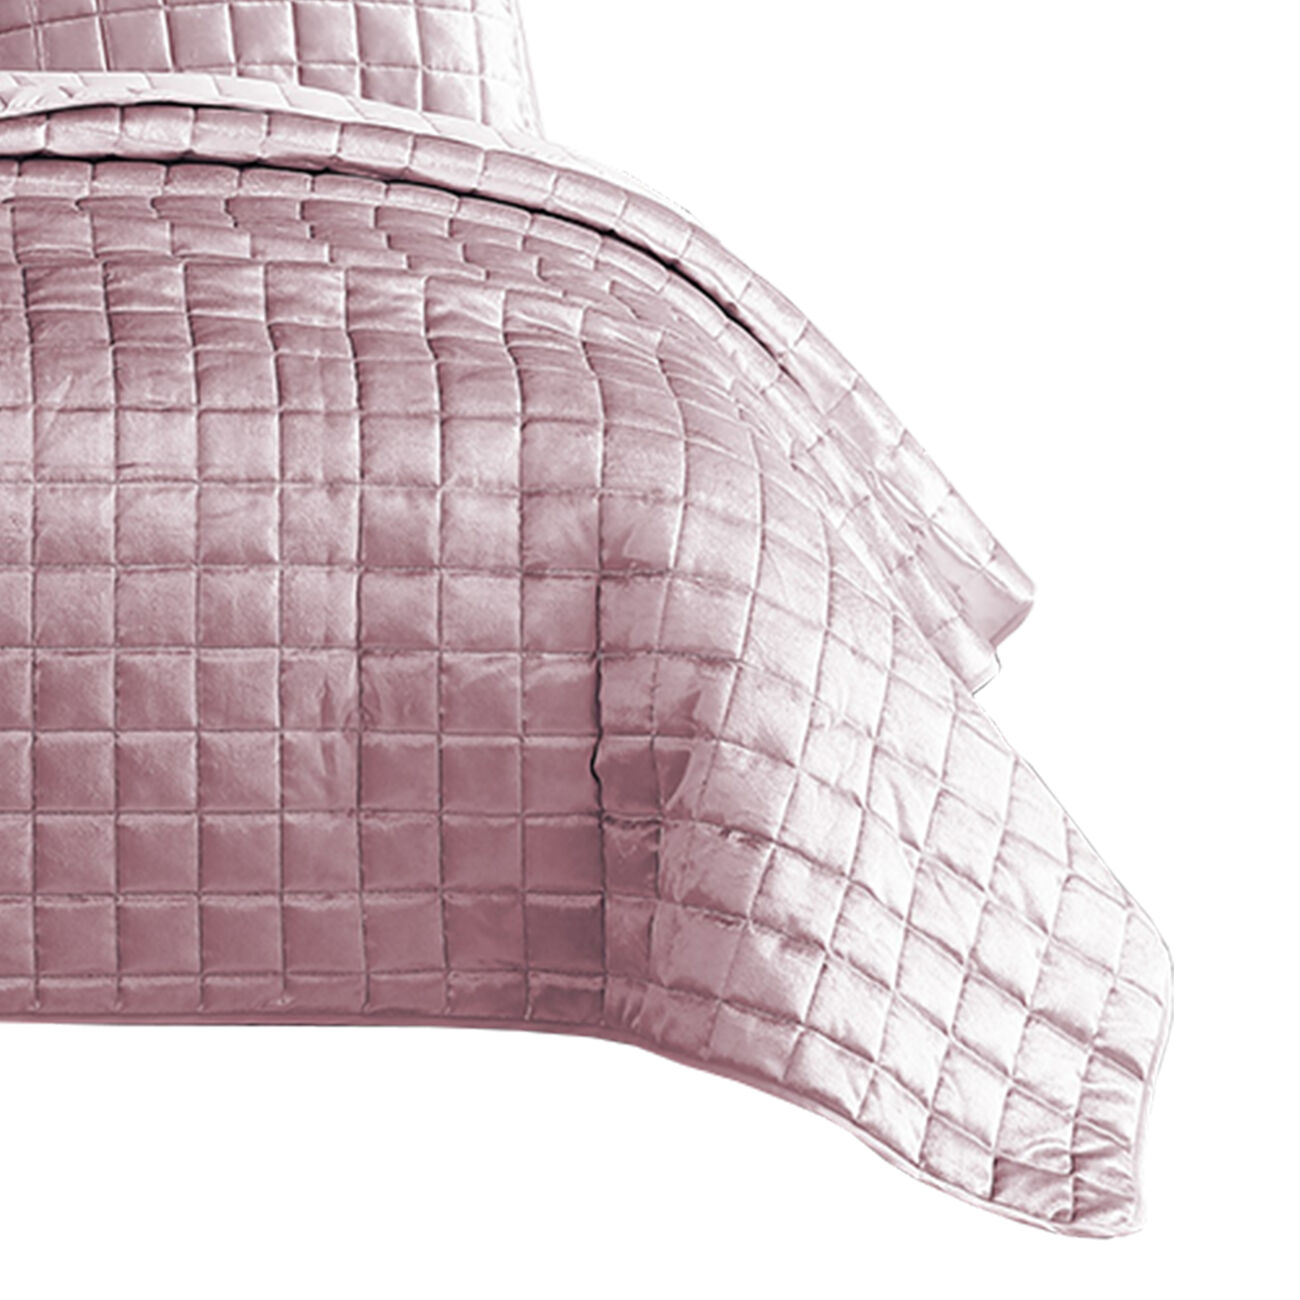 3 Piece King Size Coverlet Set with Stitched Square Pattern, Pink